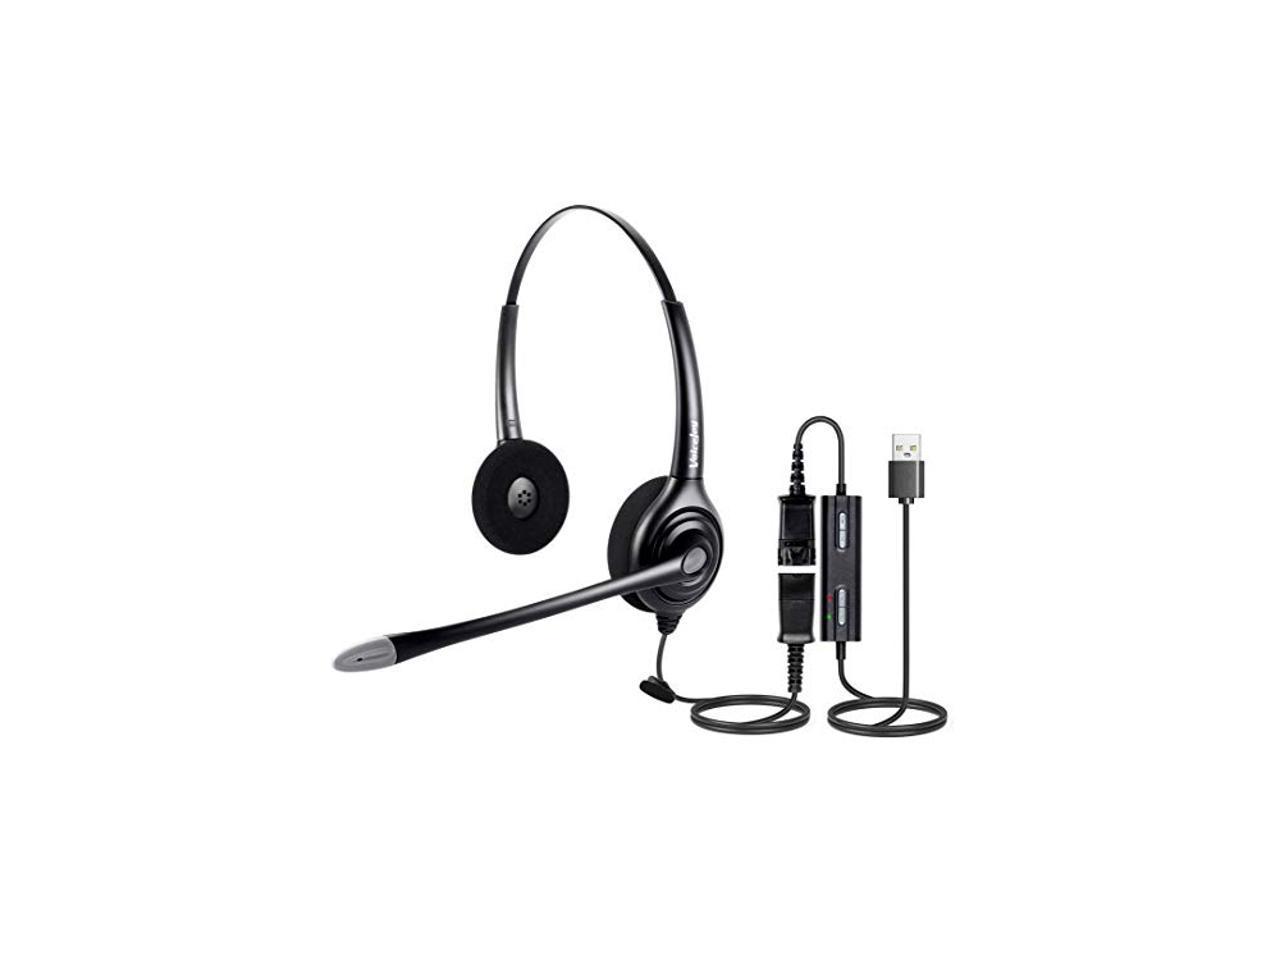 Volume Control and Mute Switch for Computer,Laptops,Chat VoiceJoy USB Headset Call Center Noise Cancelling Corded Monaural Headset Headphone with Mic Microphone Skype Cord with USB Plug Webinar 